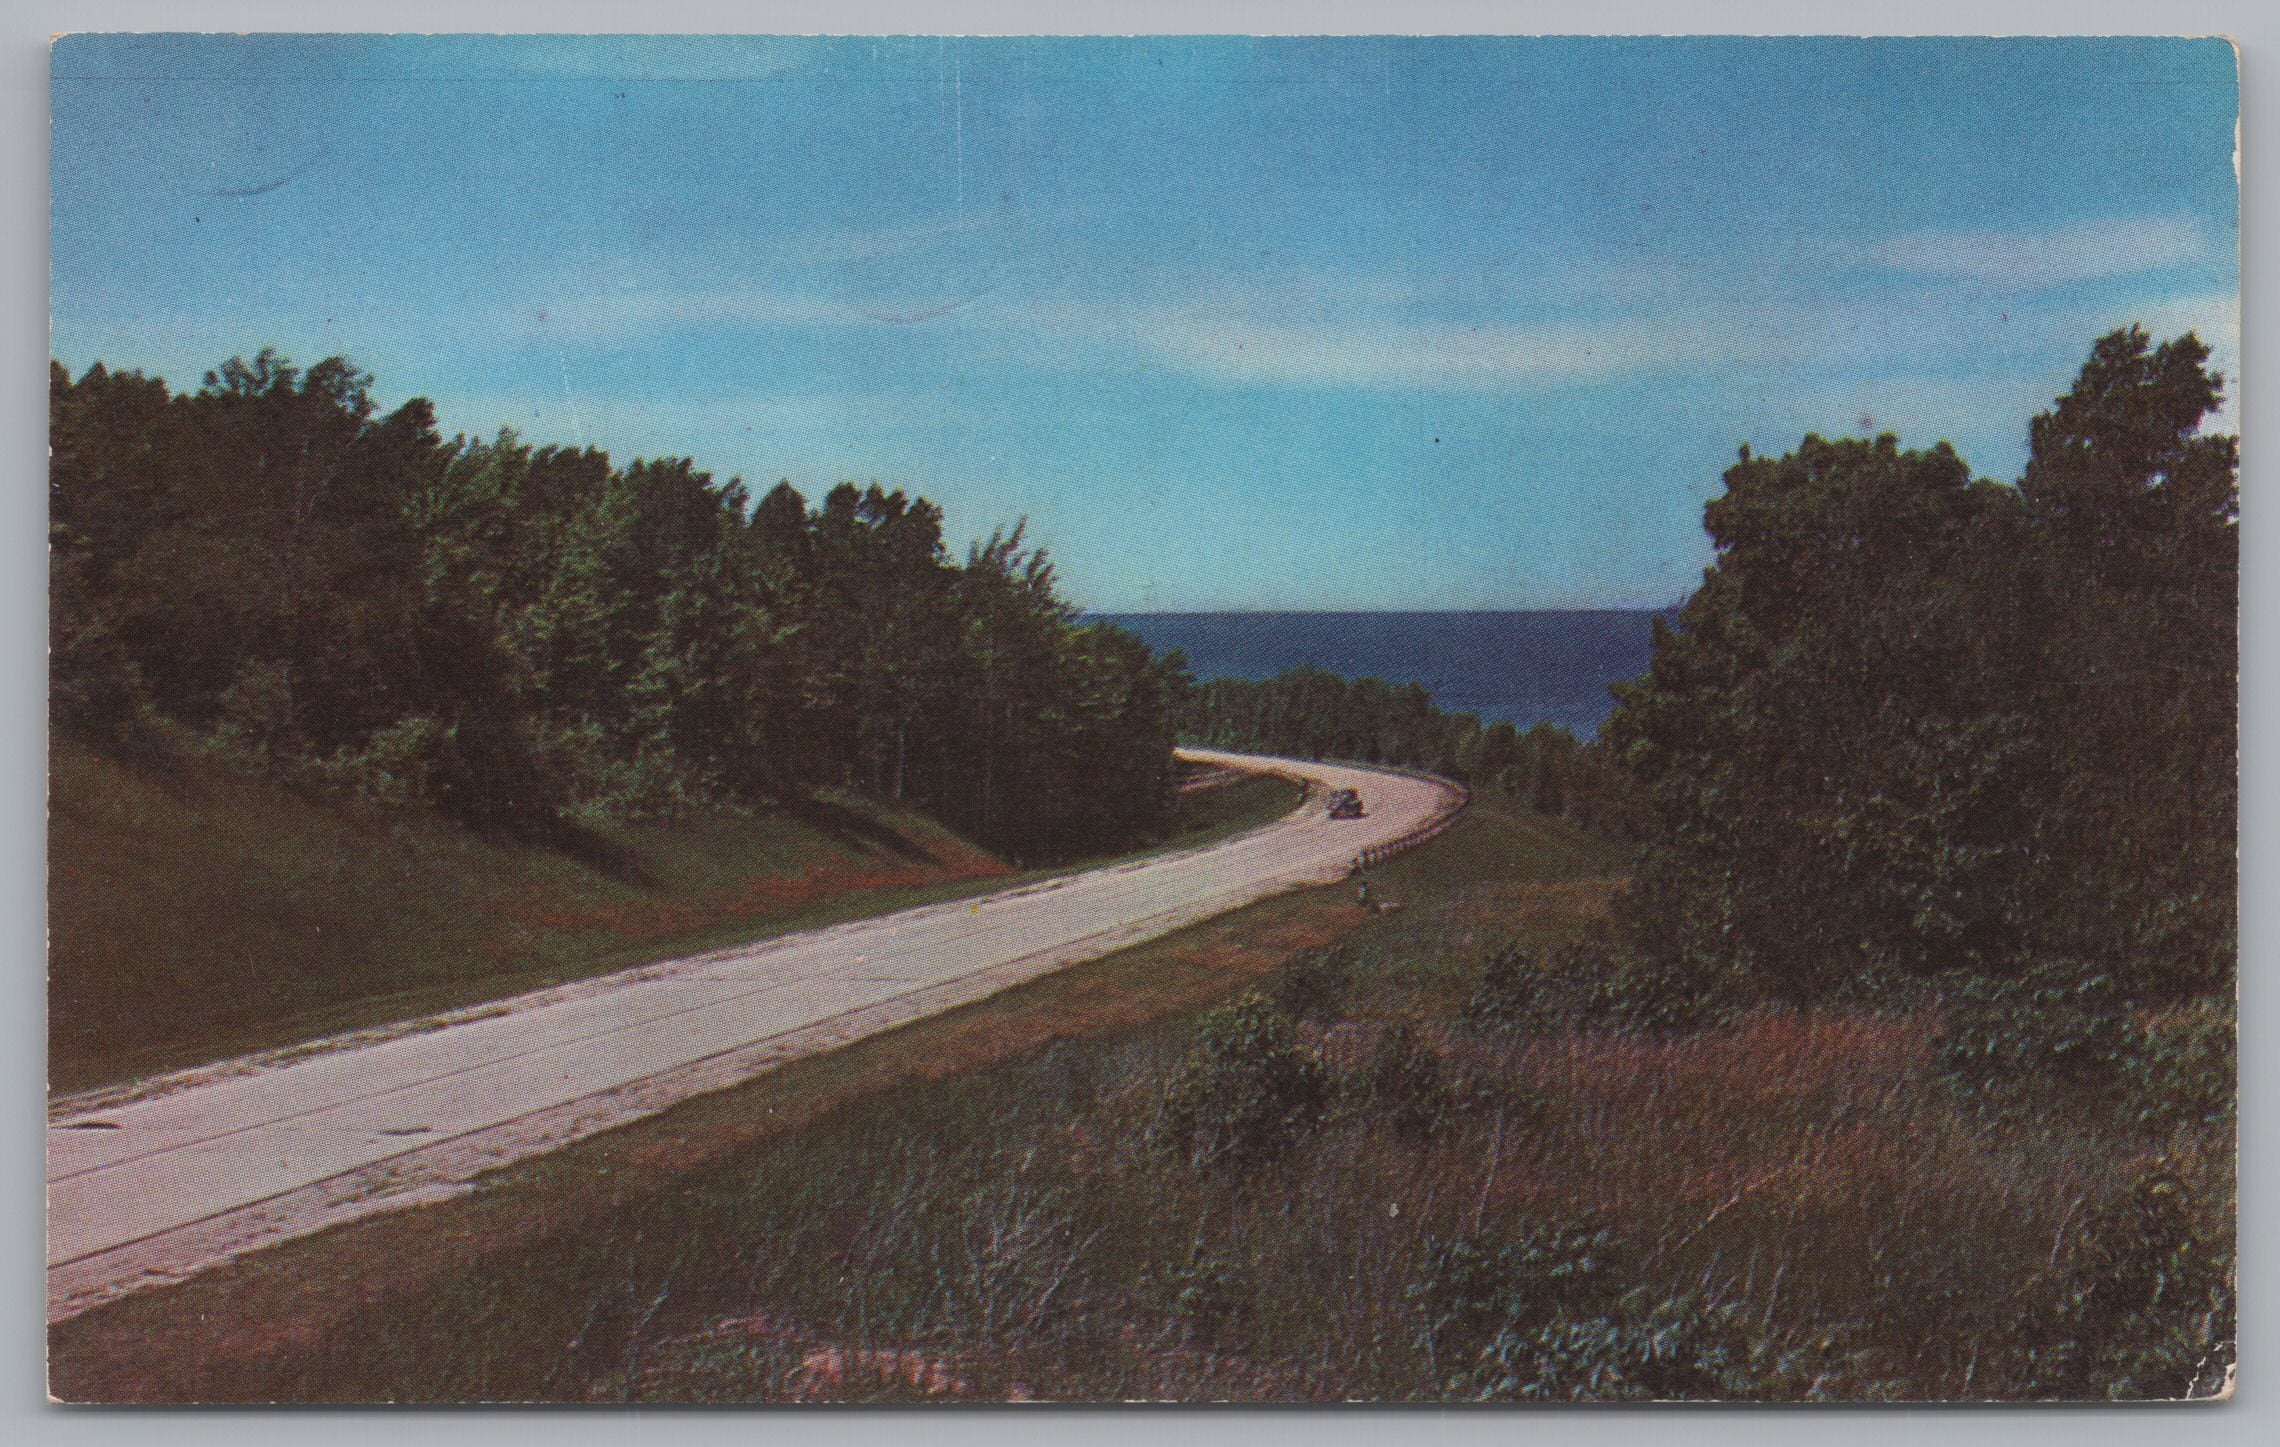 A Hill Side Road Moving Upward, Vintage Post Card.